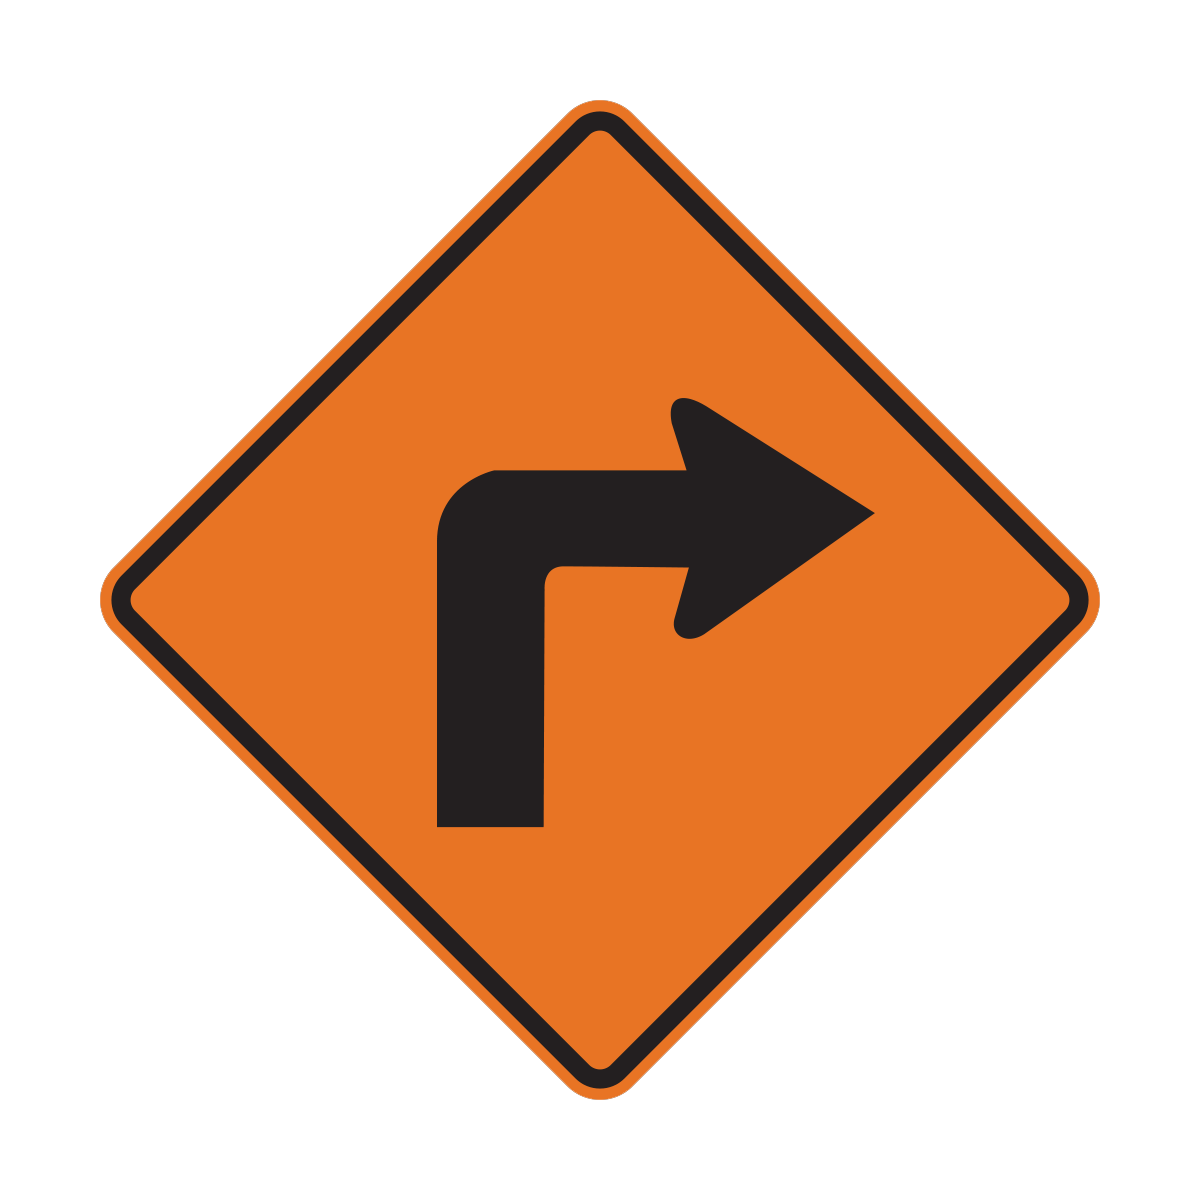 Construction Zone Turn Sign (W1-1c)